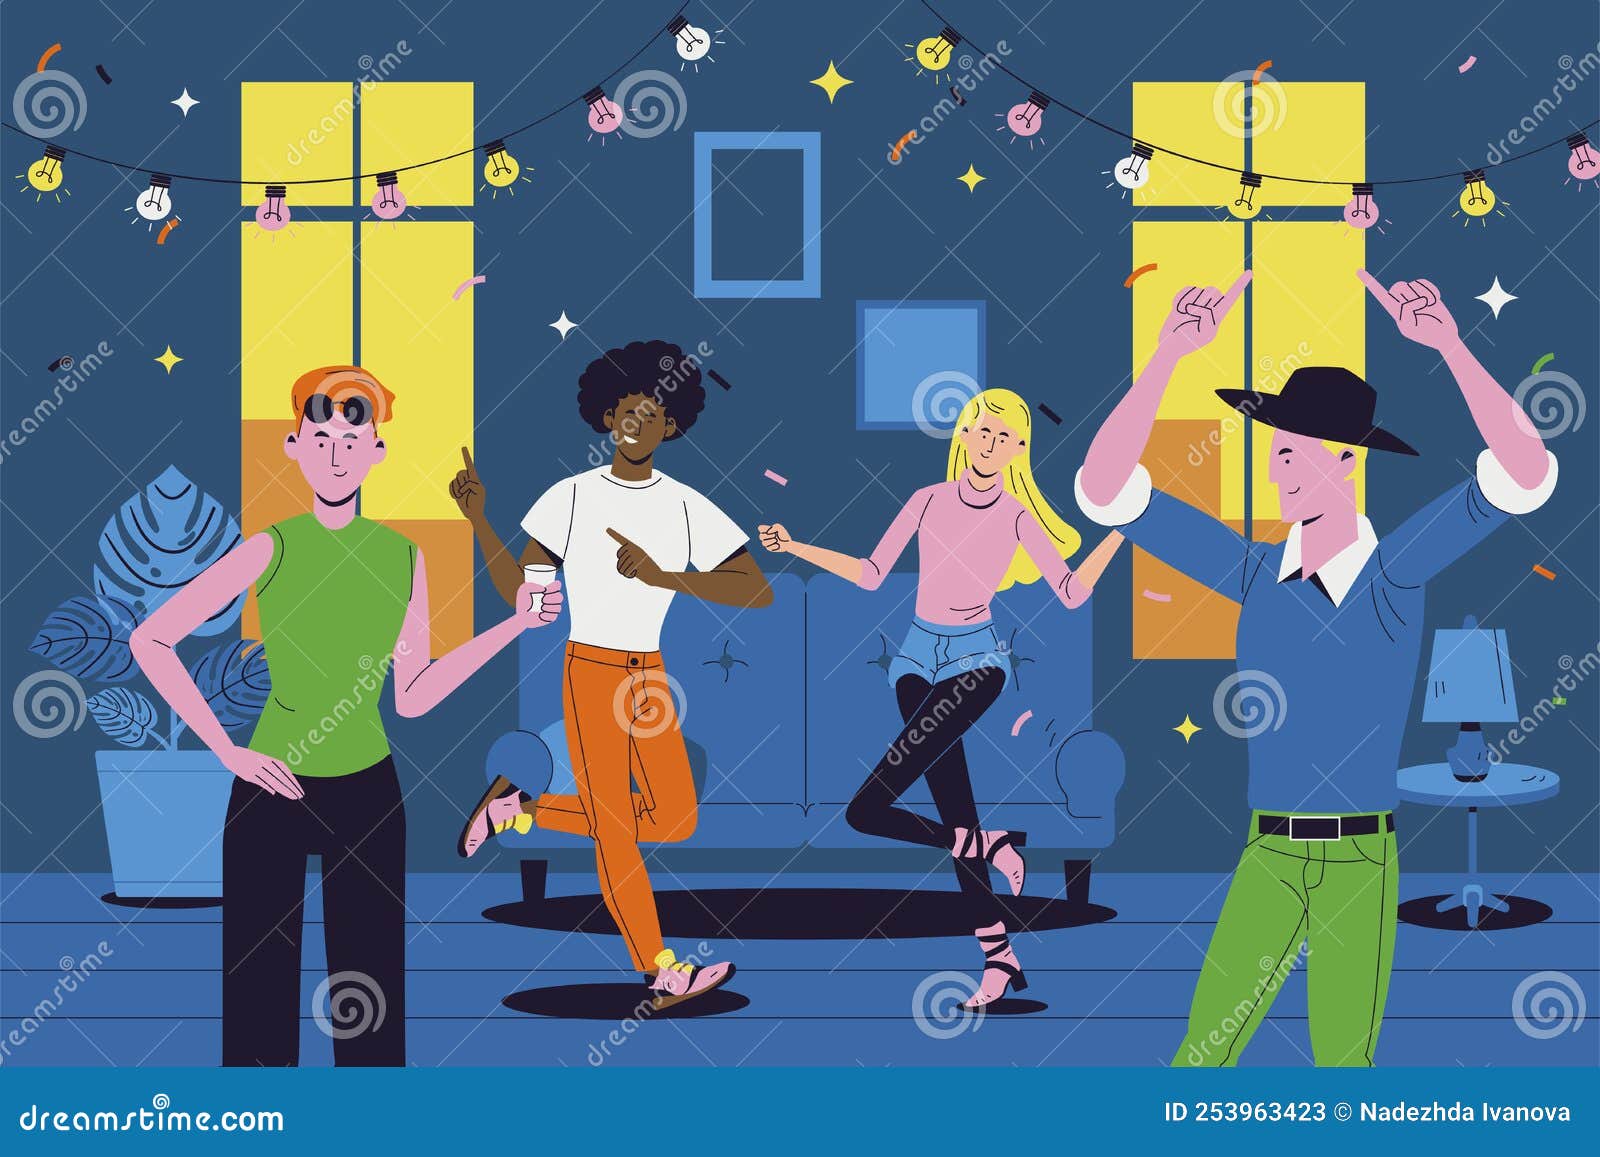 Hand Drawn House Party Vector Illustration Stock Vector - Illustration ...